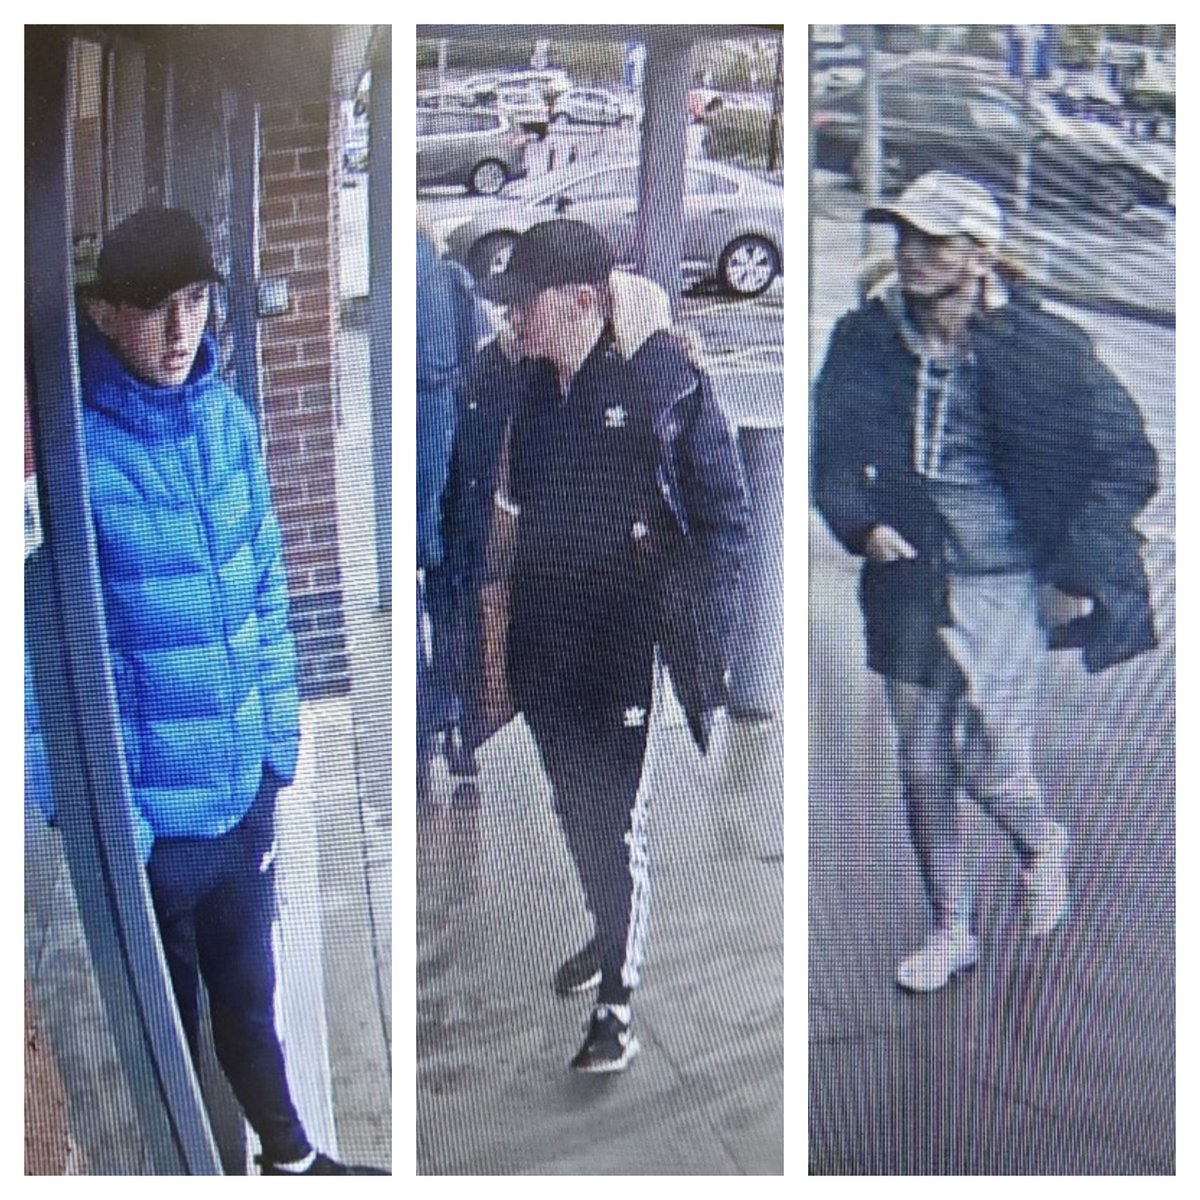 #APPEAL | Theft from store at Kingsway retail park | Reference 24*206771 We are appealing for the public’s help to identify three men in connection with a theft from a Derby business: orlo.uk/R1nAq